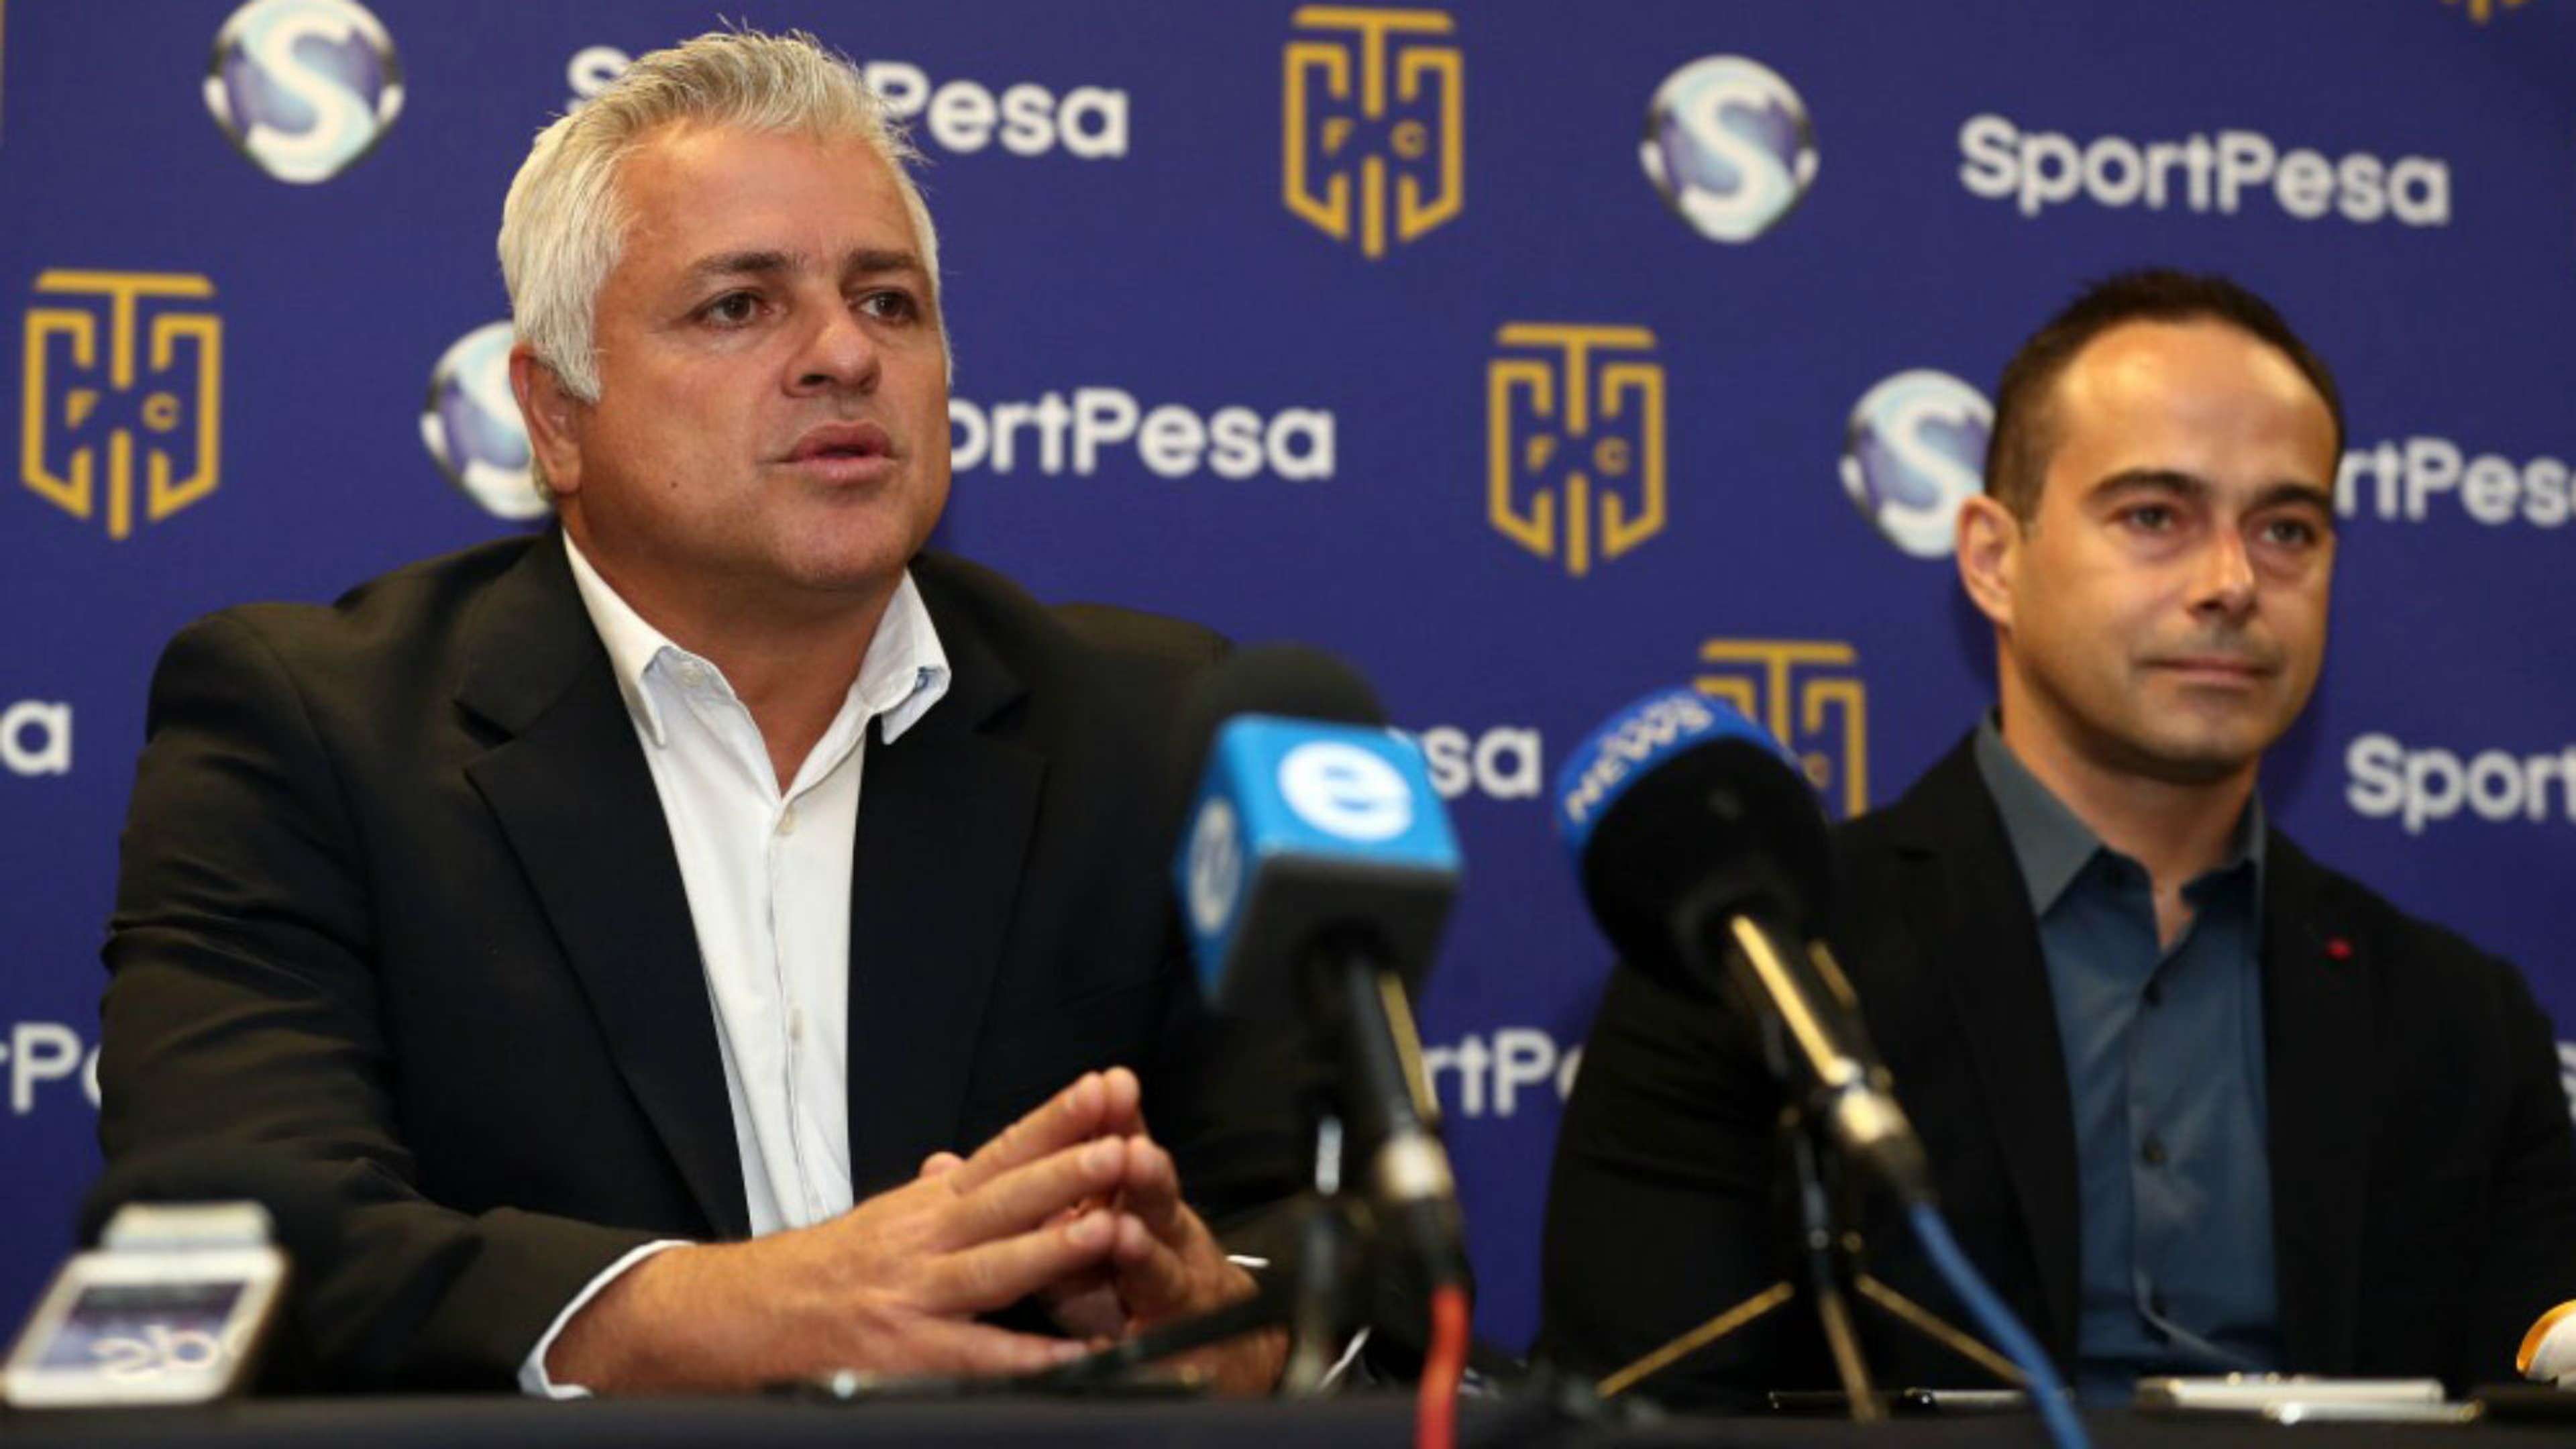 Cape Town City FC owner and chairman, John Comitis (left) and SportPesa Director, Gene Grand